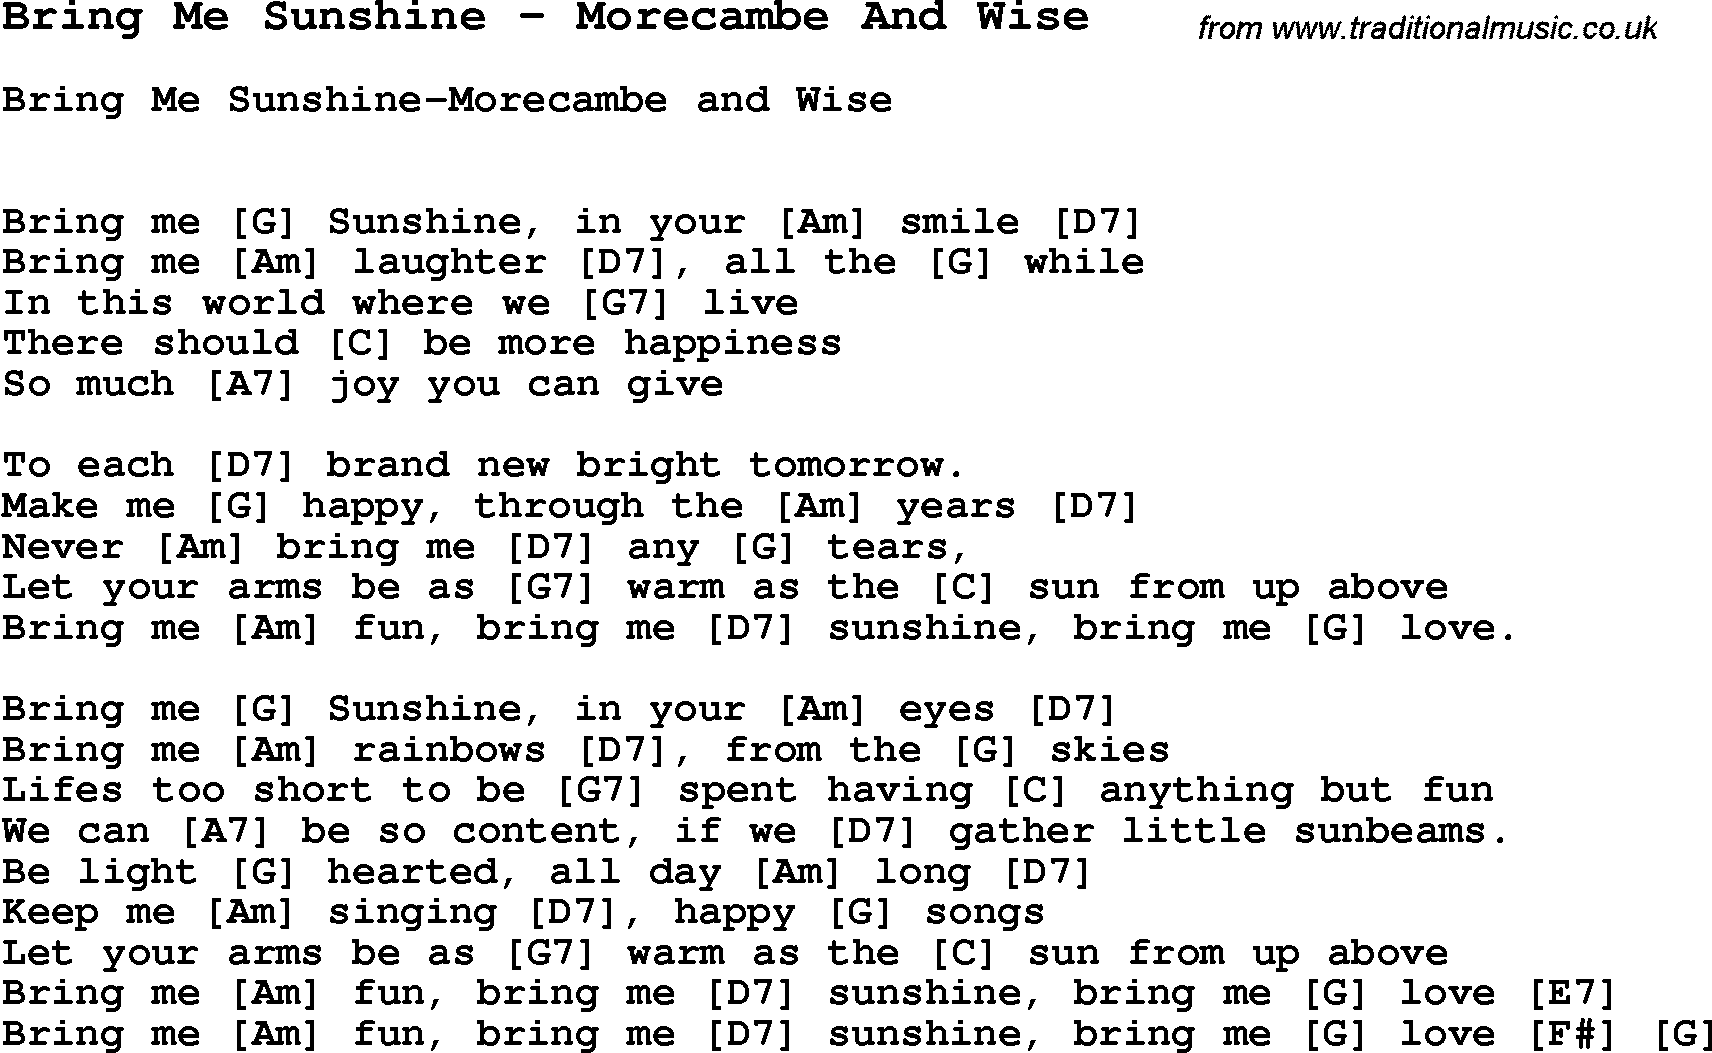 Song Bring Me Sunshine by Morecambe And Wise, with lyrics for vocal performance and accompaniment chords for Ukulele, Guitar Banjo etc.